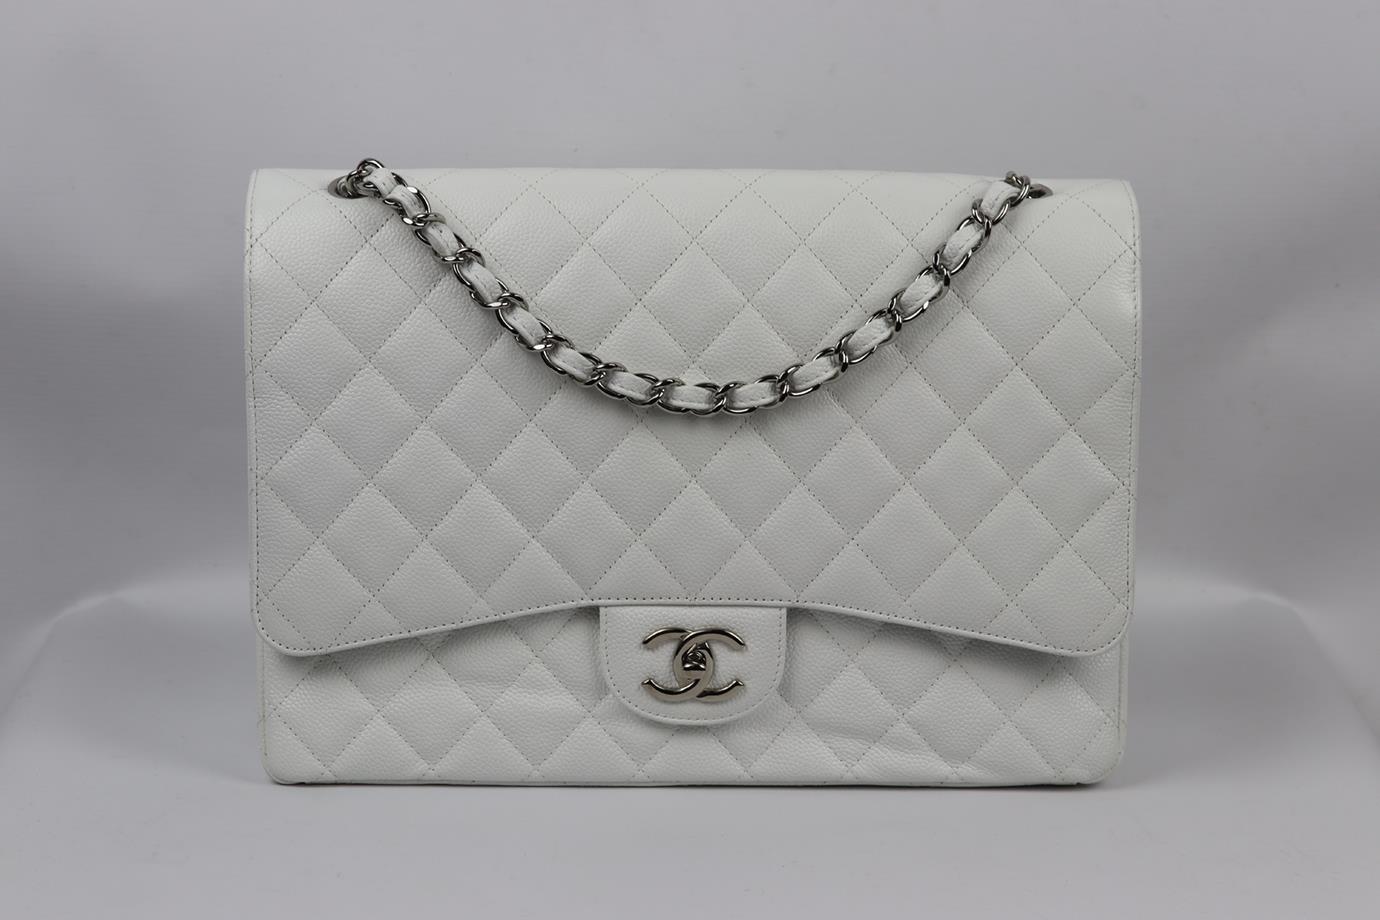 Chanel 2011 Maxi Classic quilted caviar leather double flap shoulder bag. Made from white caviar-leather with matching leather interior and palladium chain shoulder straps. White. Twist lock fastening at front. Does not come with authenticity card.